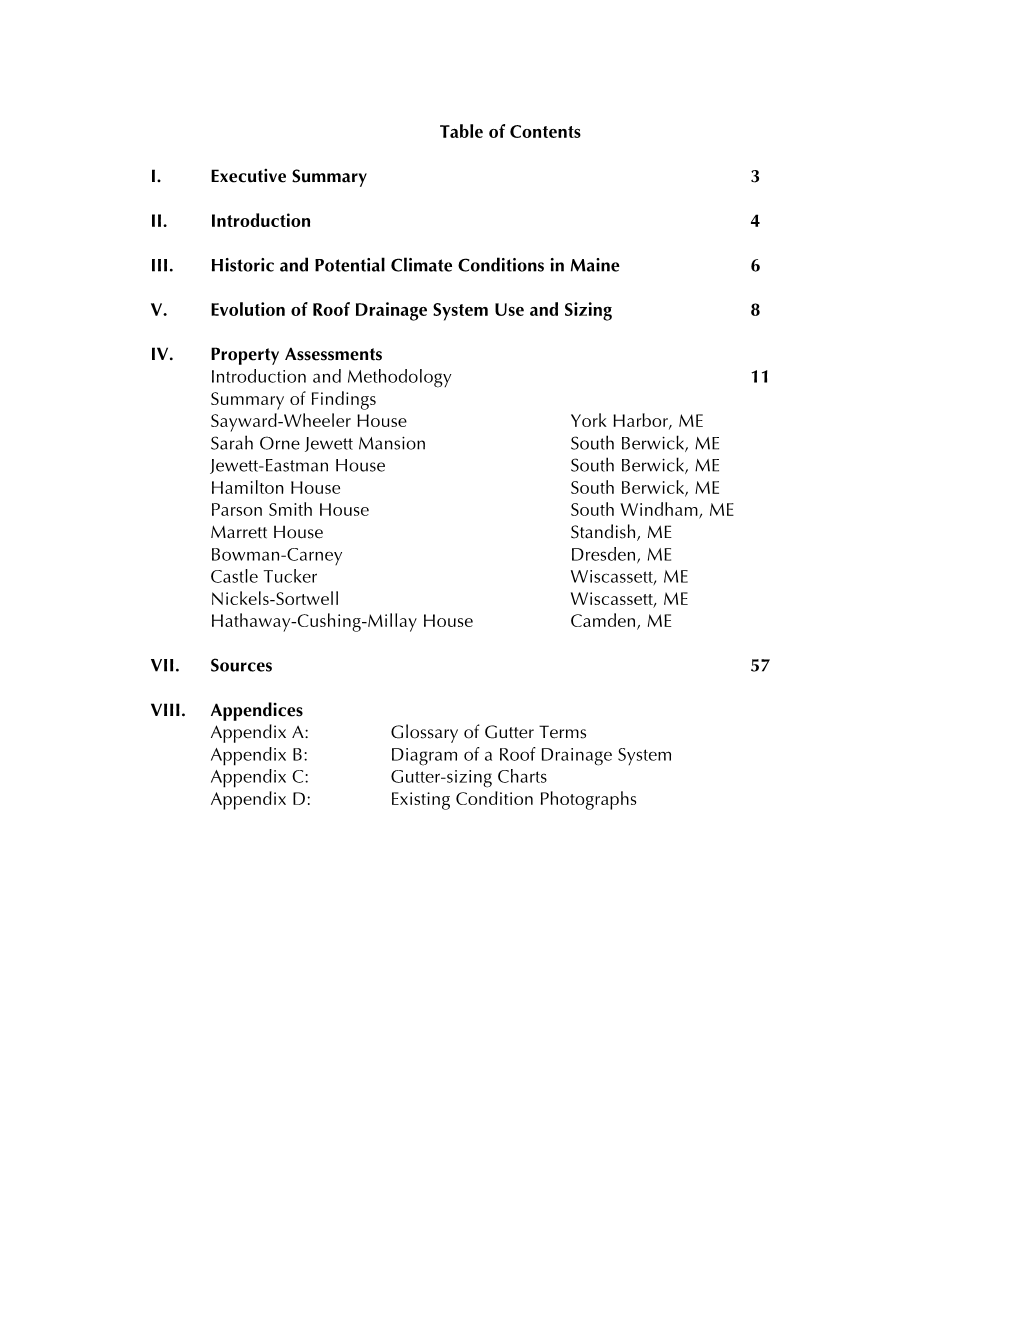 Table of Contents I. Executive Summary 3 II. Introduction 4 III. Historic and Potential Climate Conditions in Maine 6 V. Evol